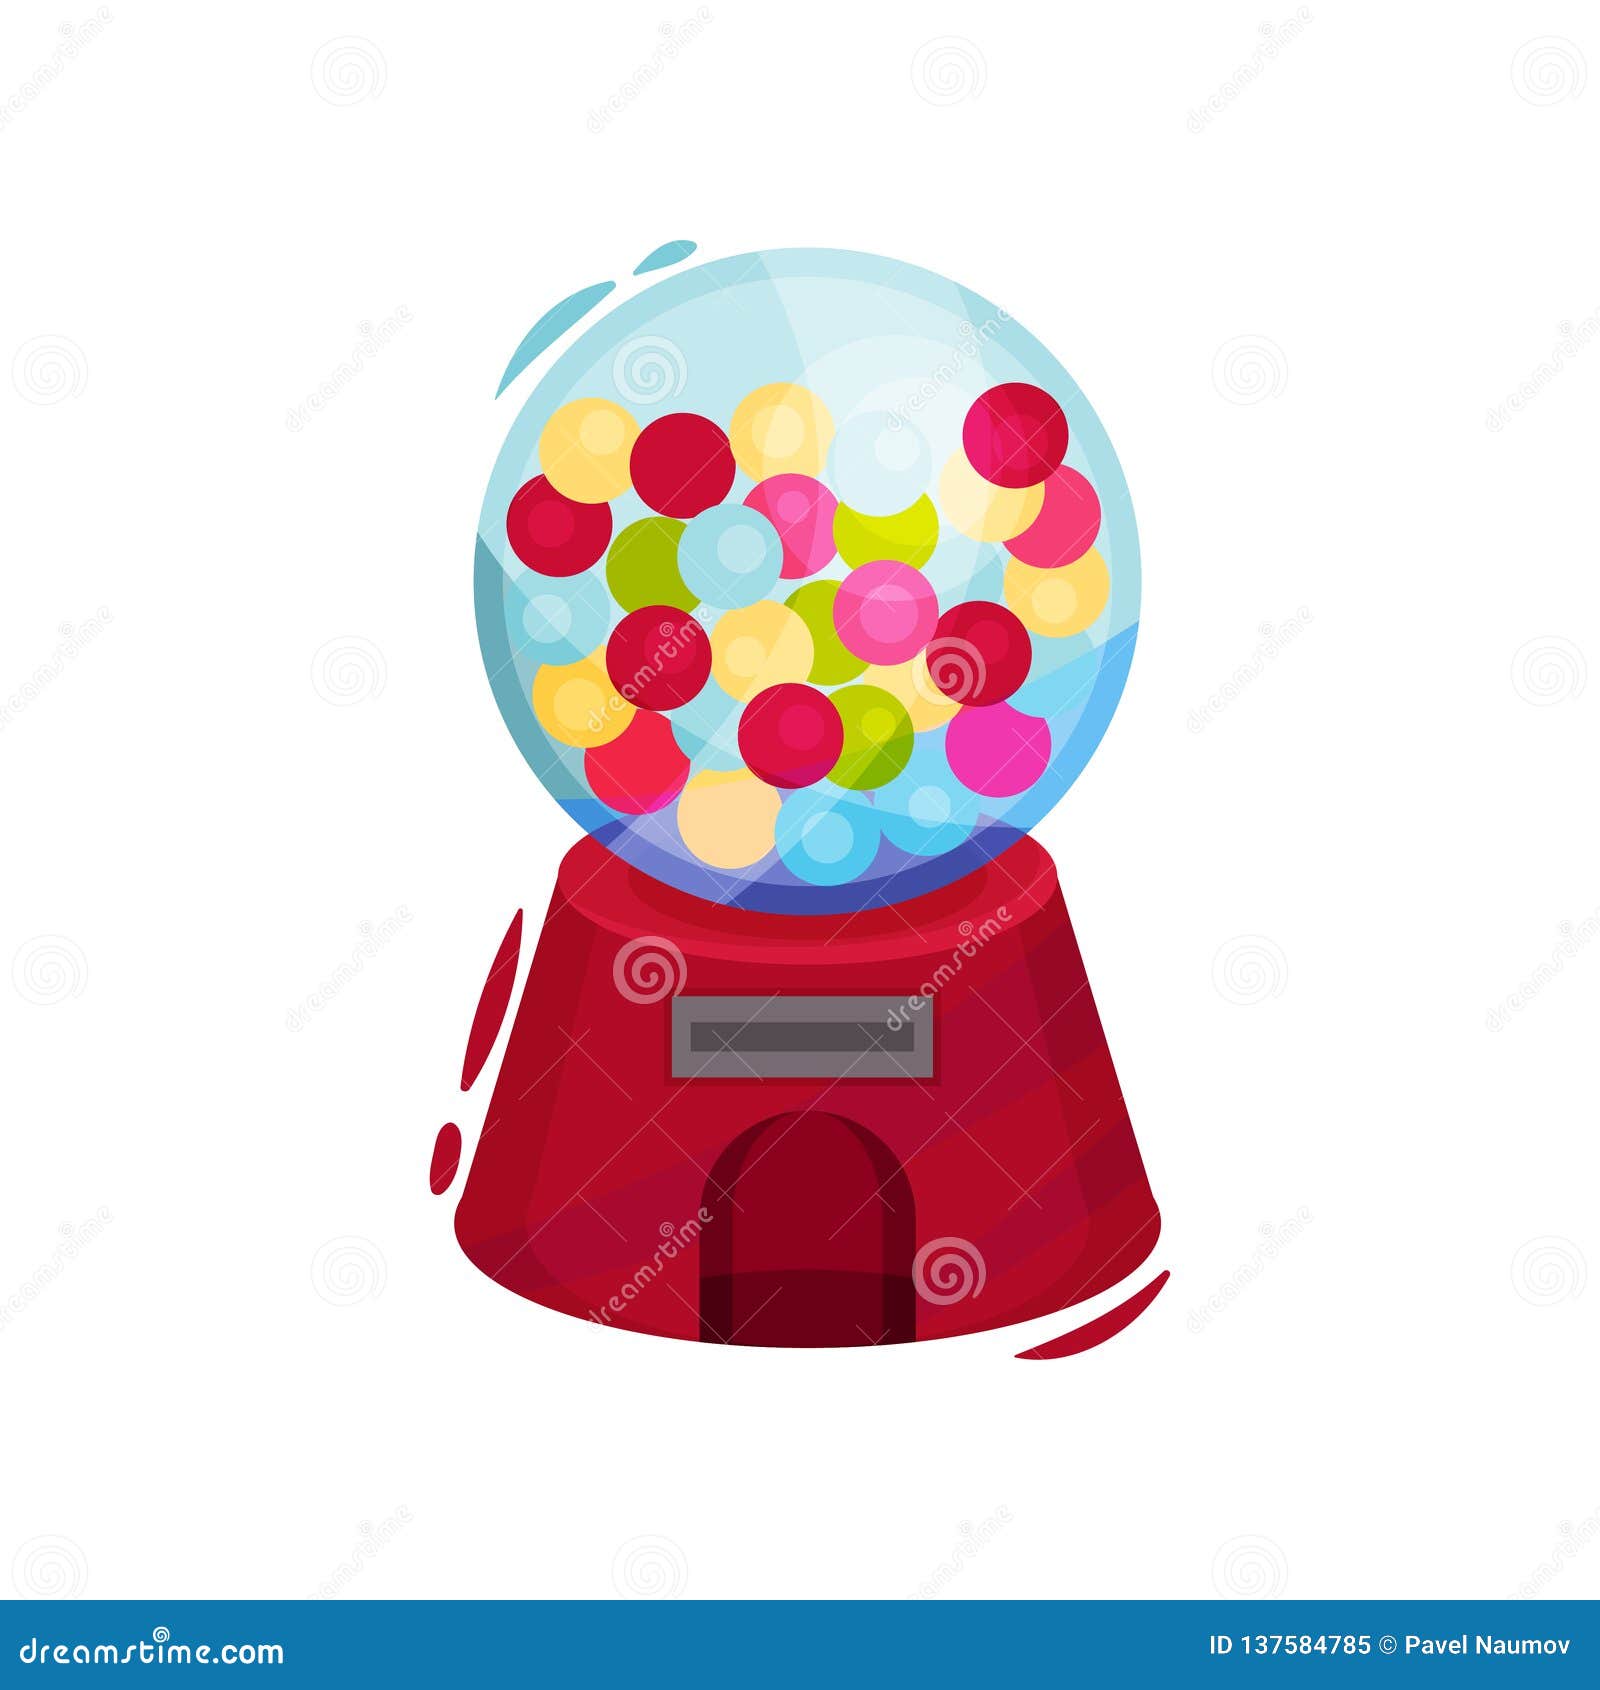 Glass Gumball Machine with Slot for Penny. Vintage Machine with Bubble Gums  or Candies. Cartoon Vector Design Stock Vector - Illustration of item,  flyer: 137584785